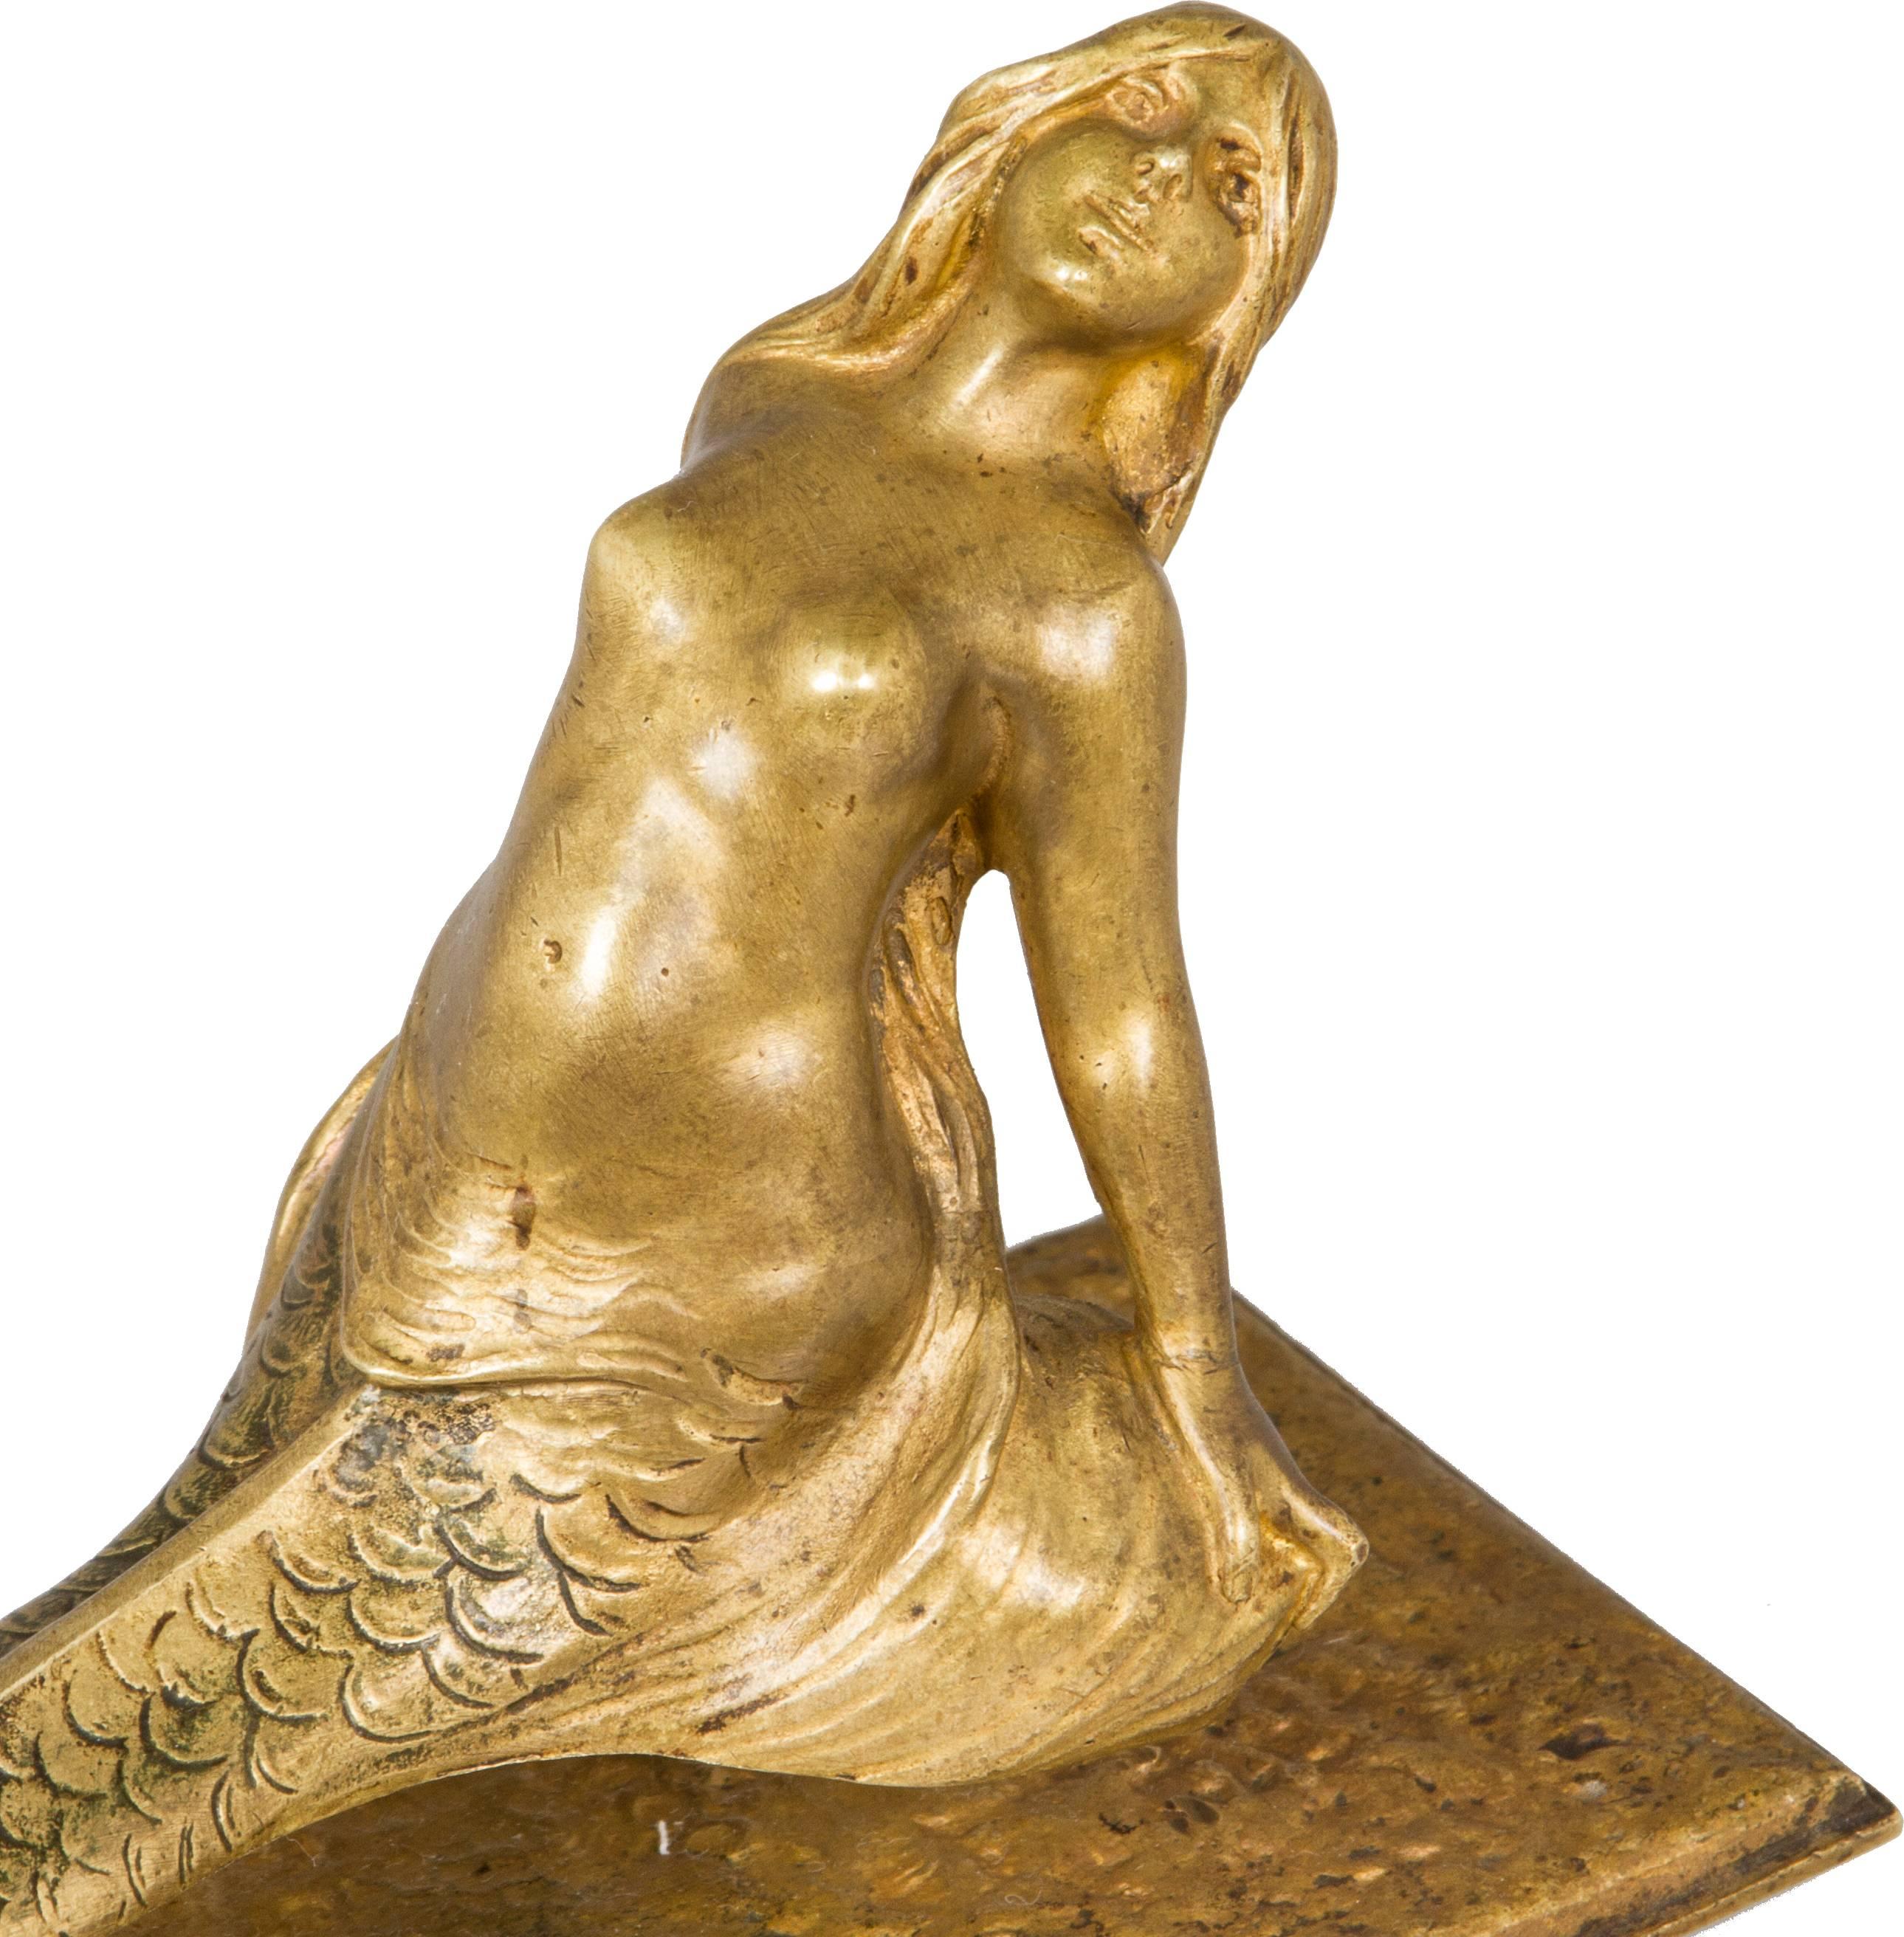 This is a beautifully sculpted bronze doré letter opener. A mermaid sits atop a flower.